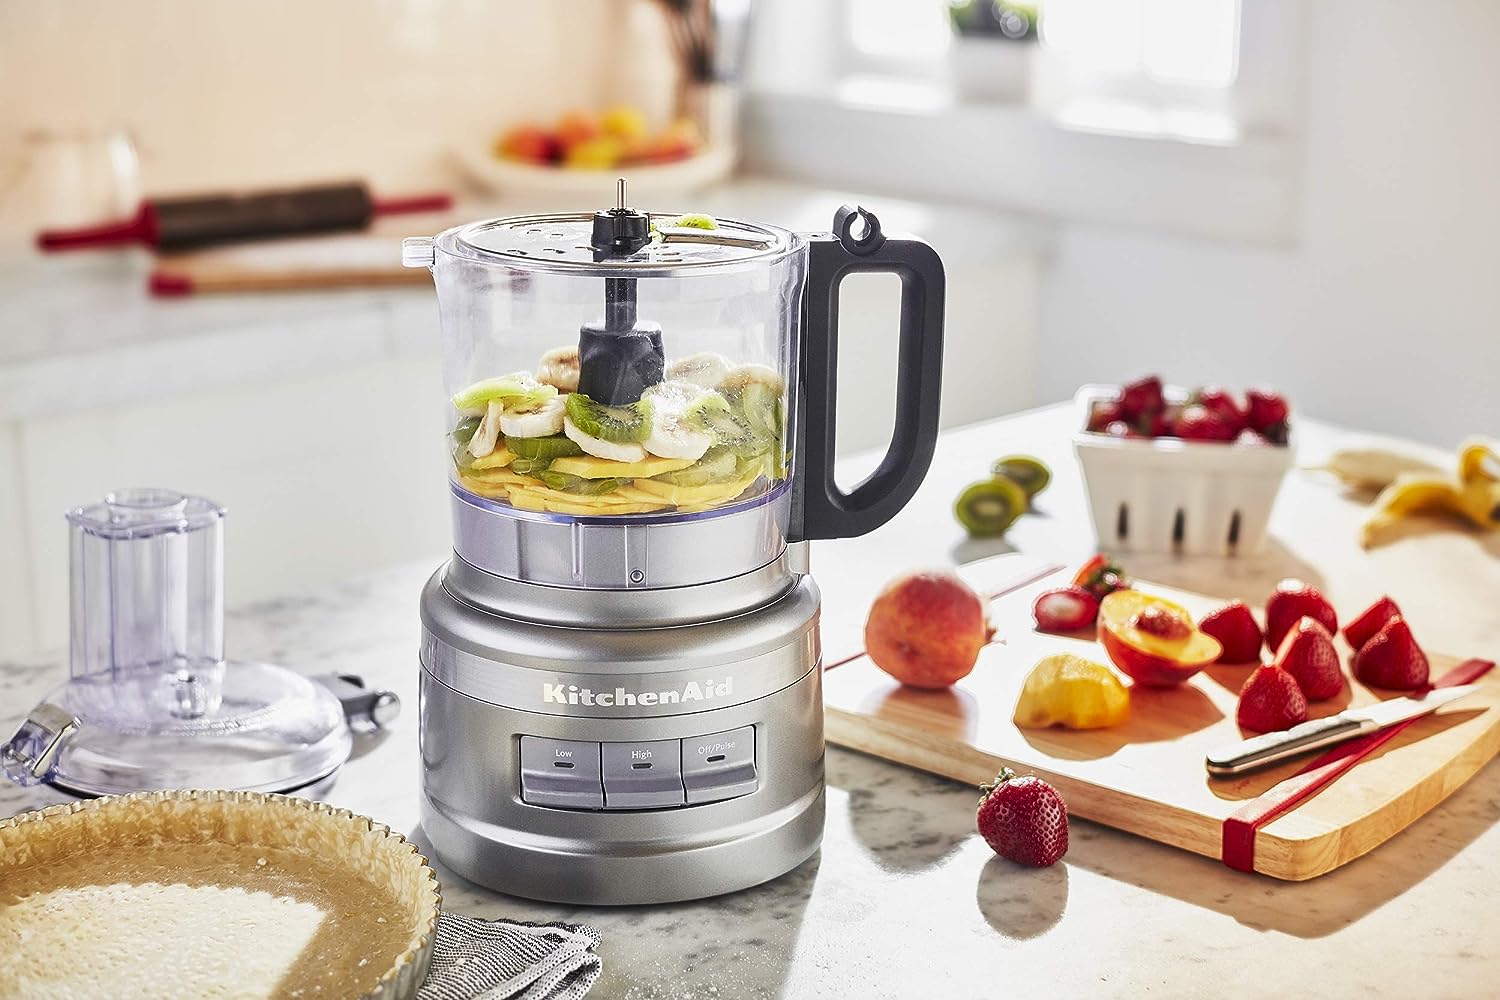 How To Put Together A Food Processor